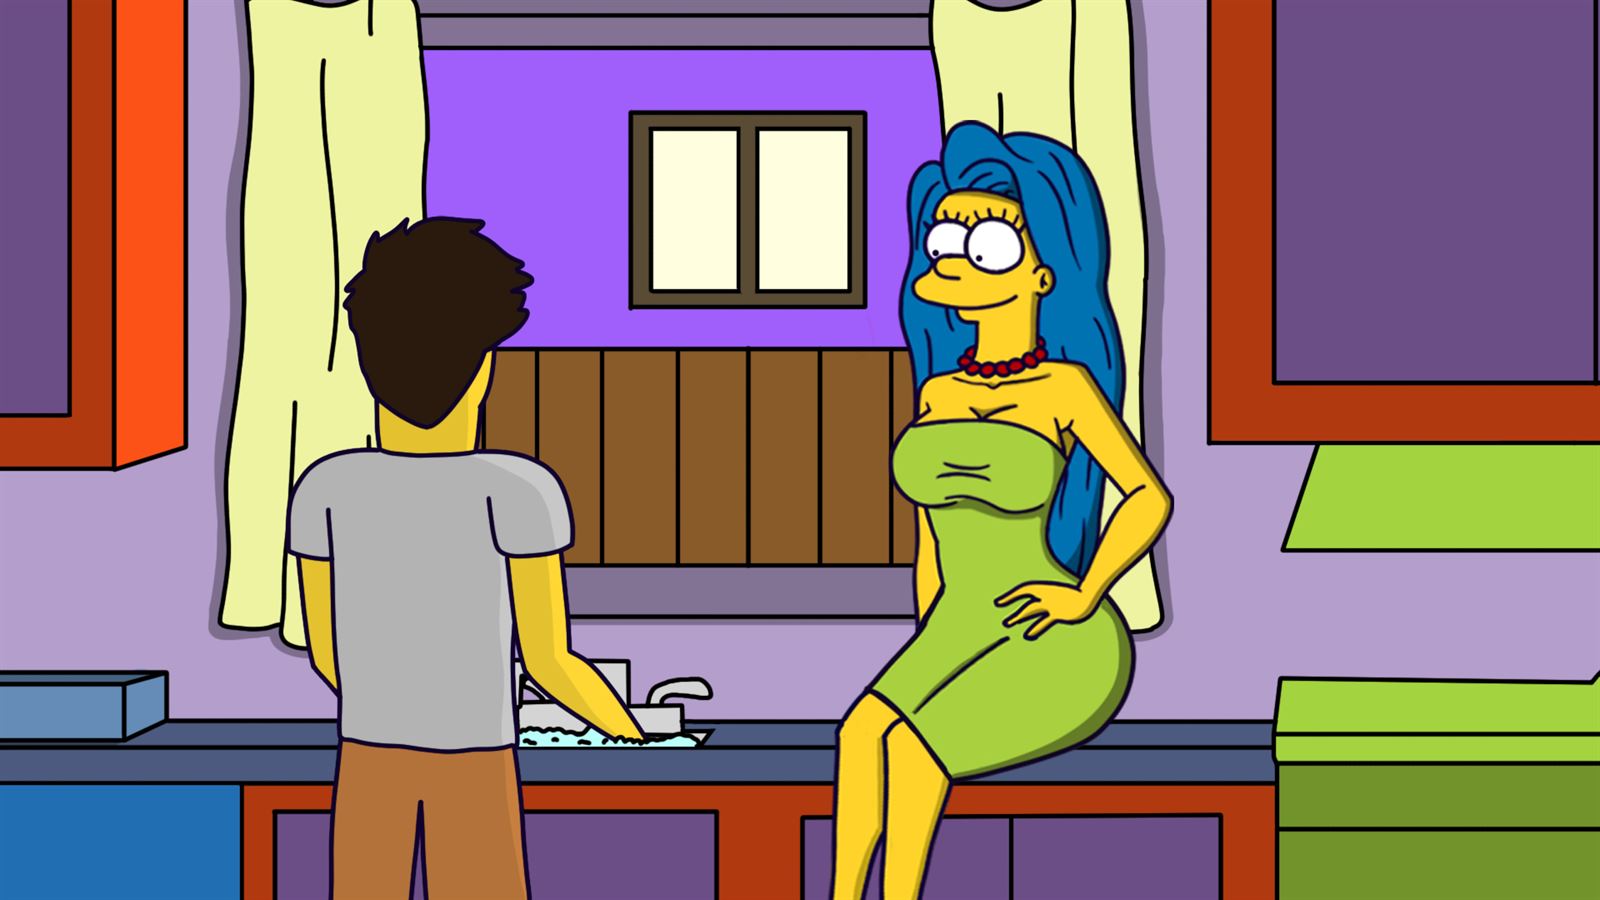 Simpsons Porn Games - Ren'py] The Simpsons Simpvill - v1.03 by Squizzy 18+ Adult xxx Porn Game  Download